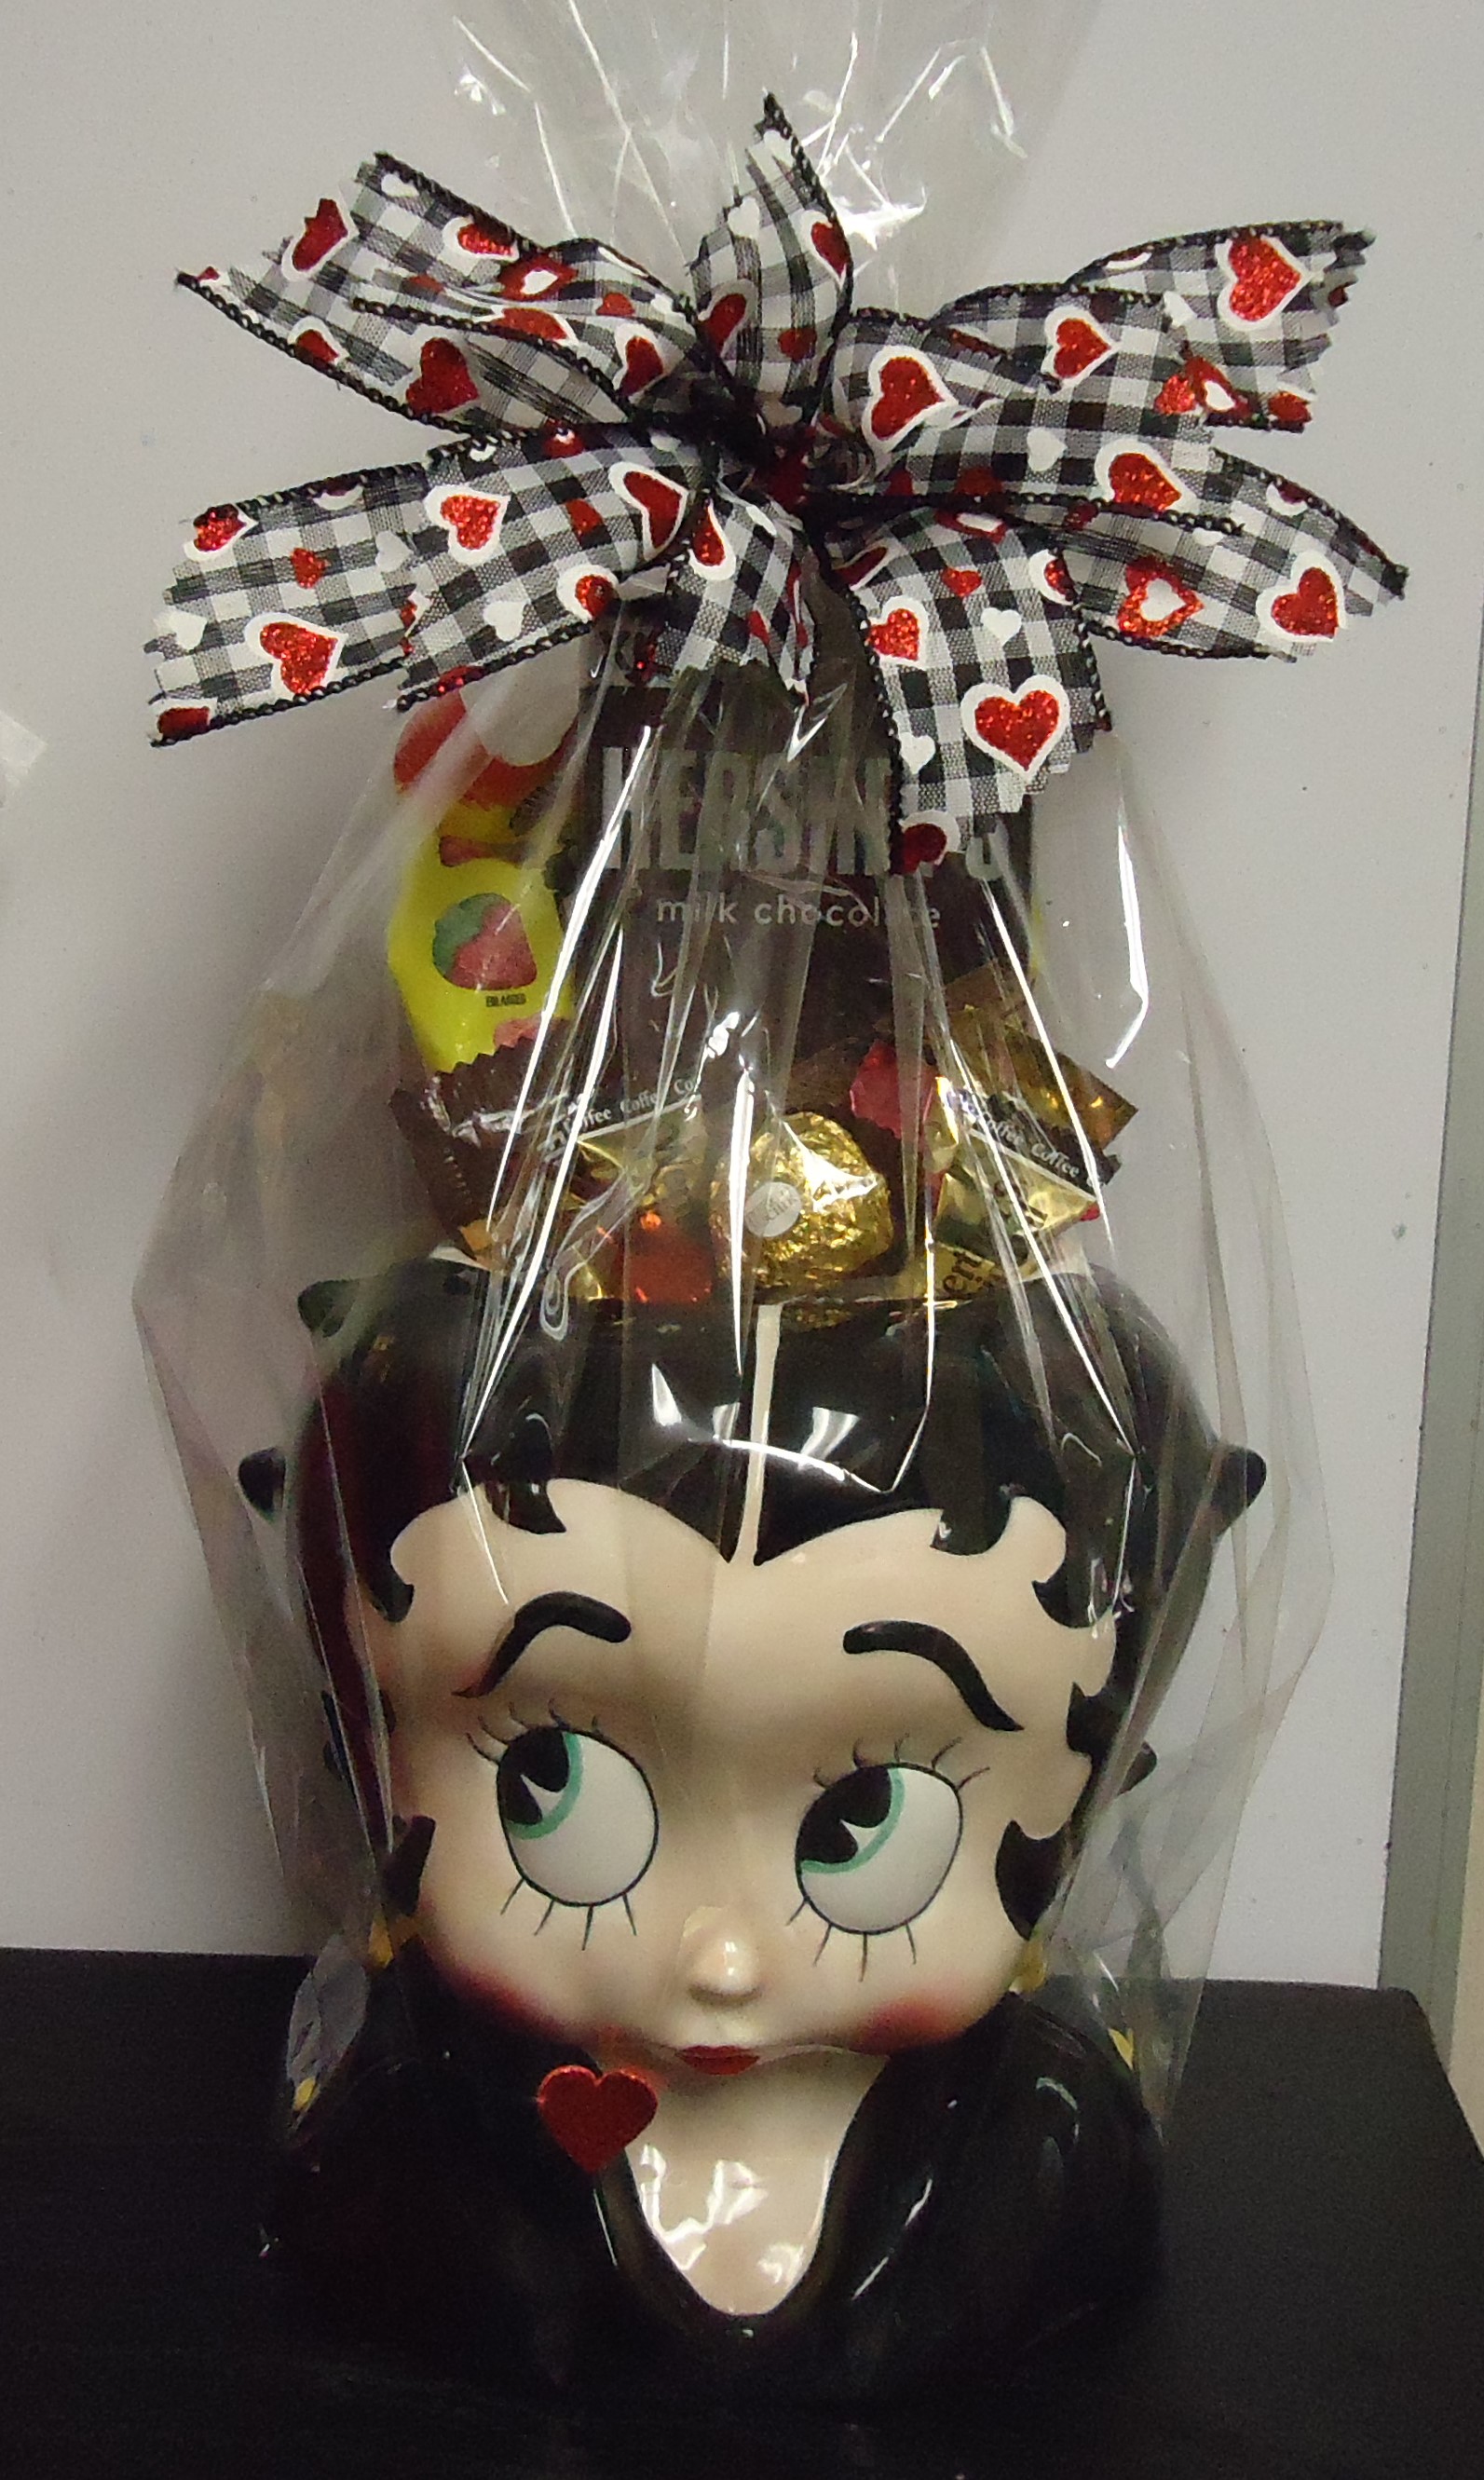 (7) "Betty Boop" Filled
W/ Goodies
$65.00